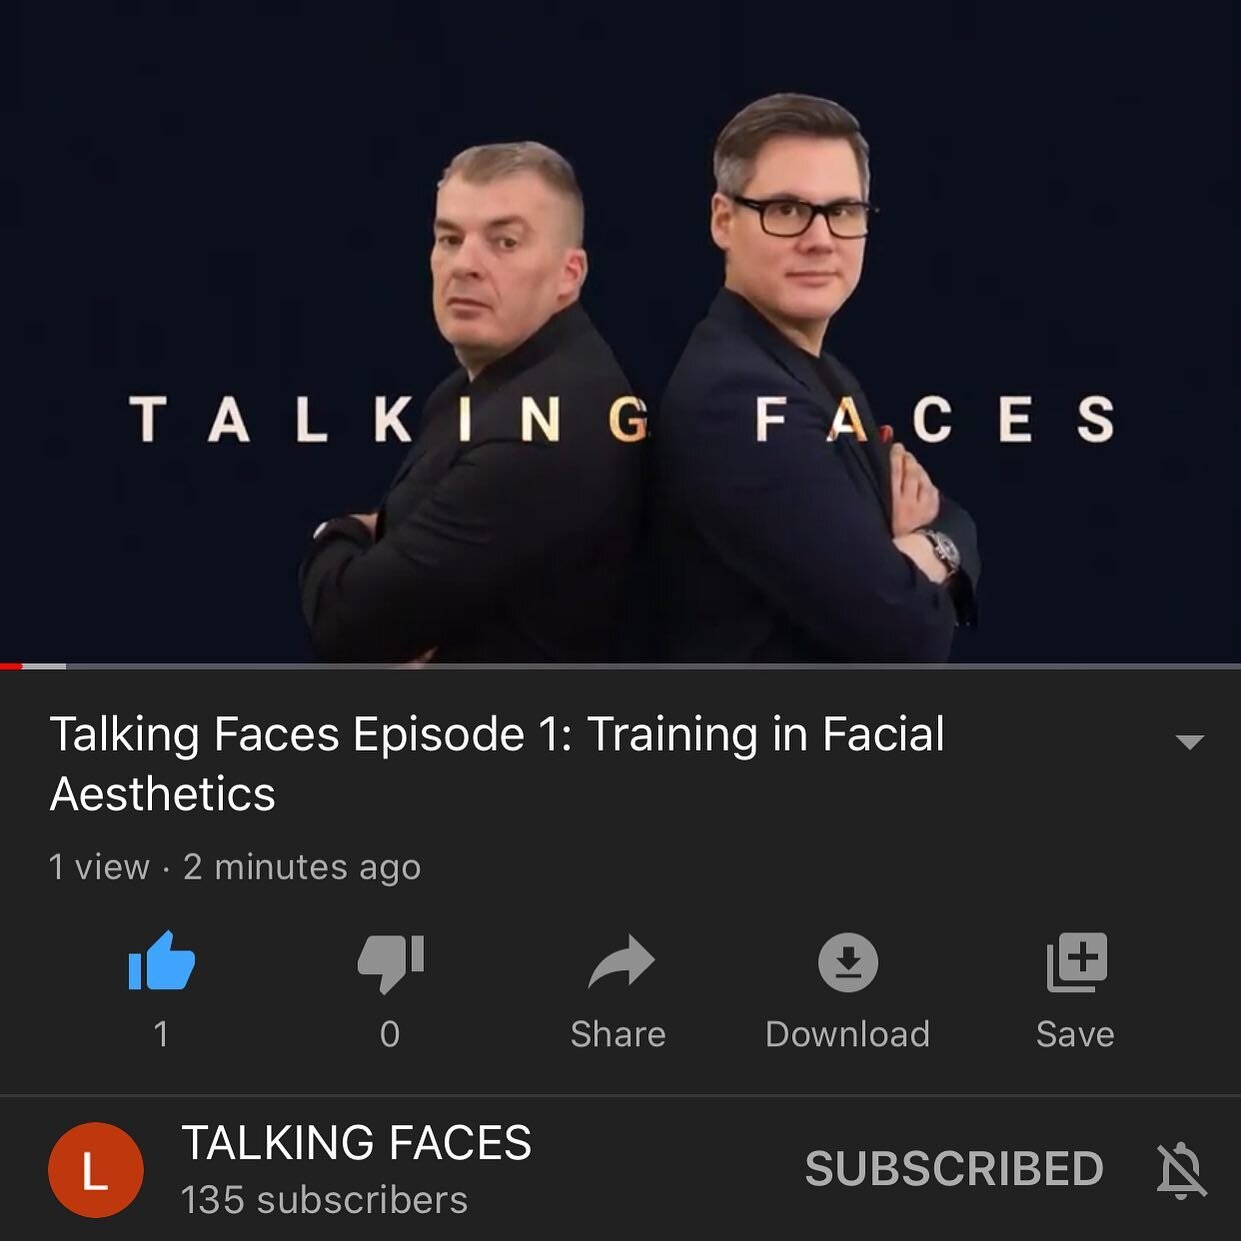 First episode of Talking Faces up live on YouTube, today we discussed training in Facial Aesthetics. Tune in for a new episode every week with @leewalker_academy  https://youtu.be/j5j-ZGwDck8